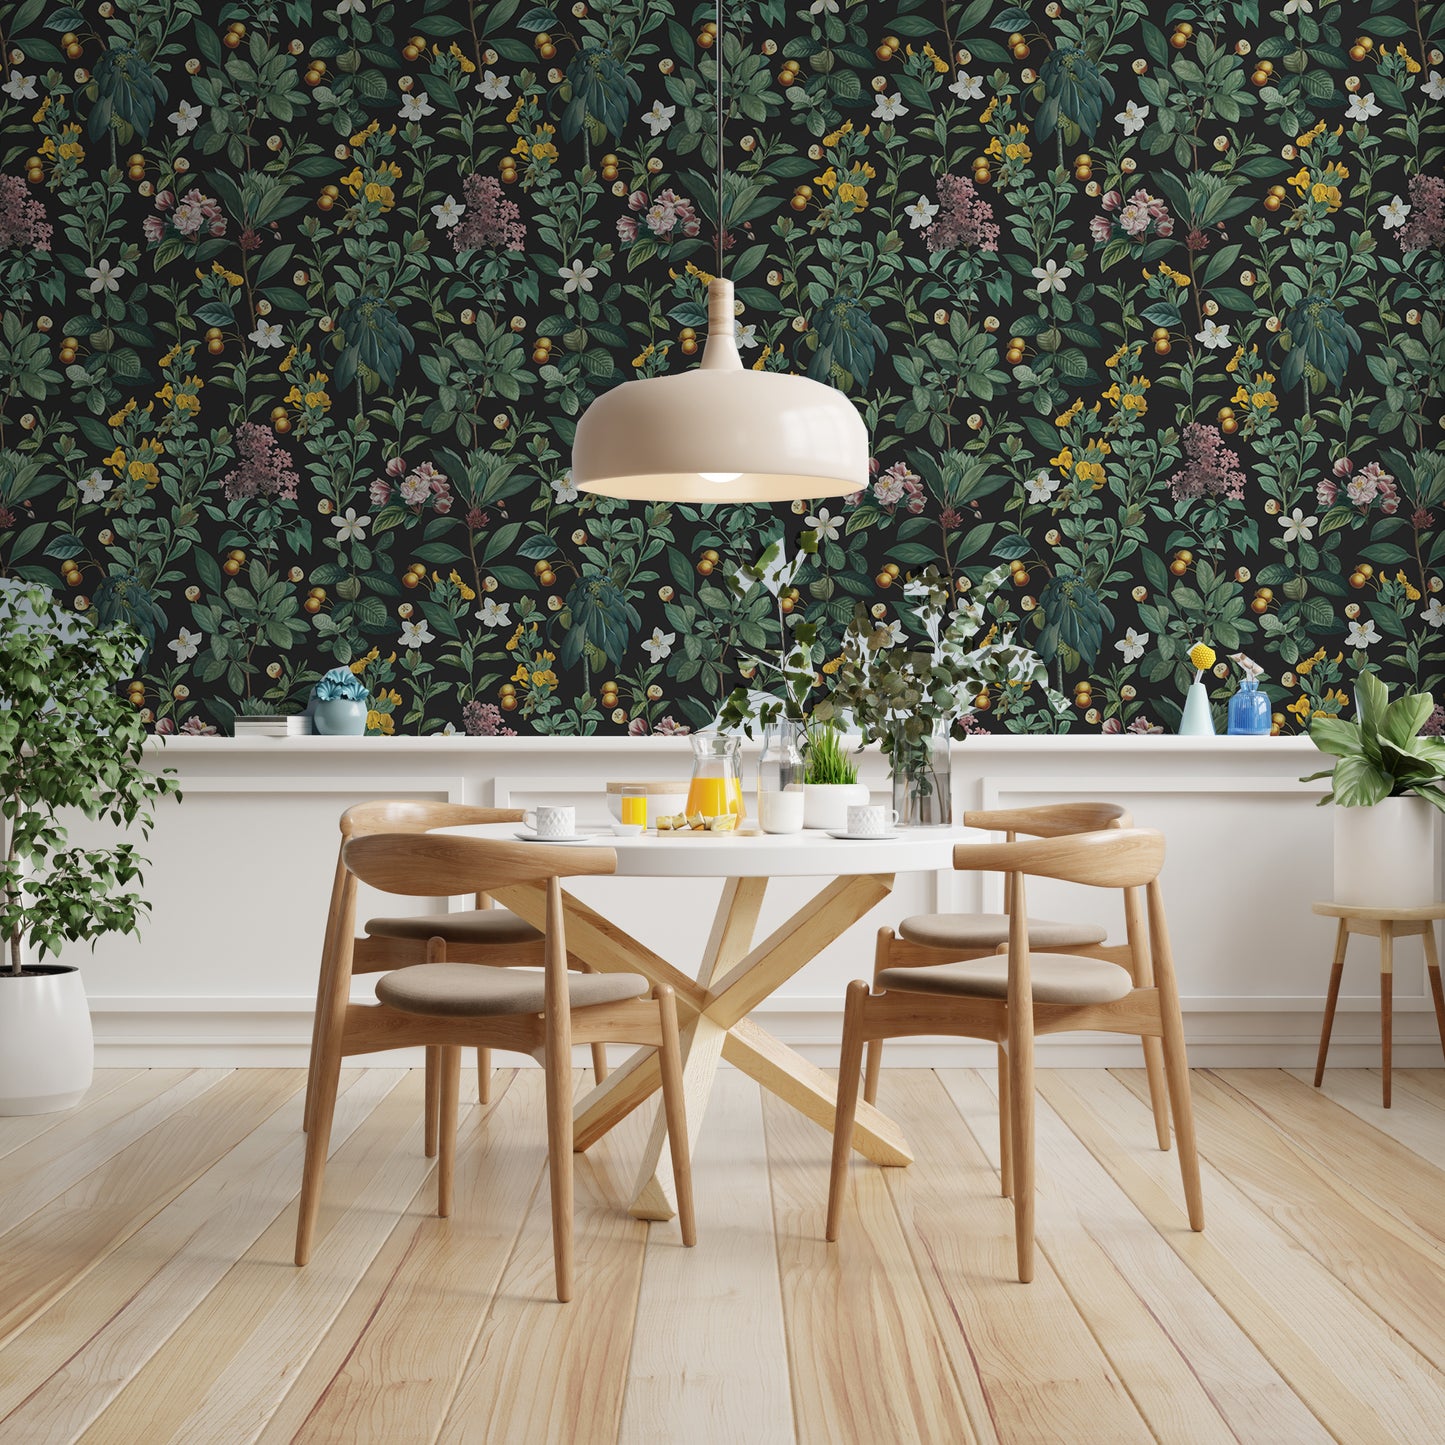 Night Blossom Removable Peel And Stick Wallpaper